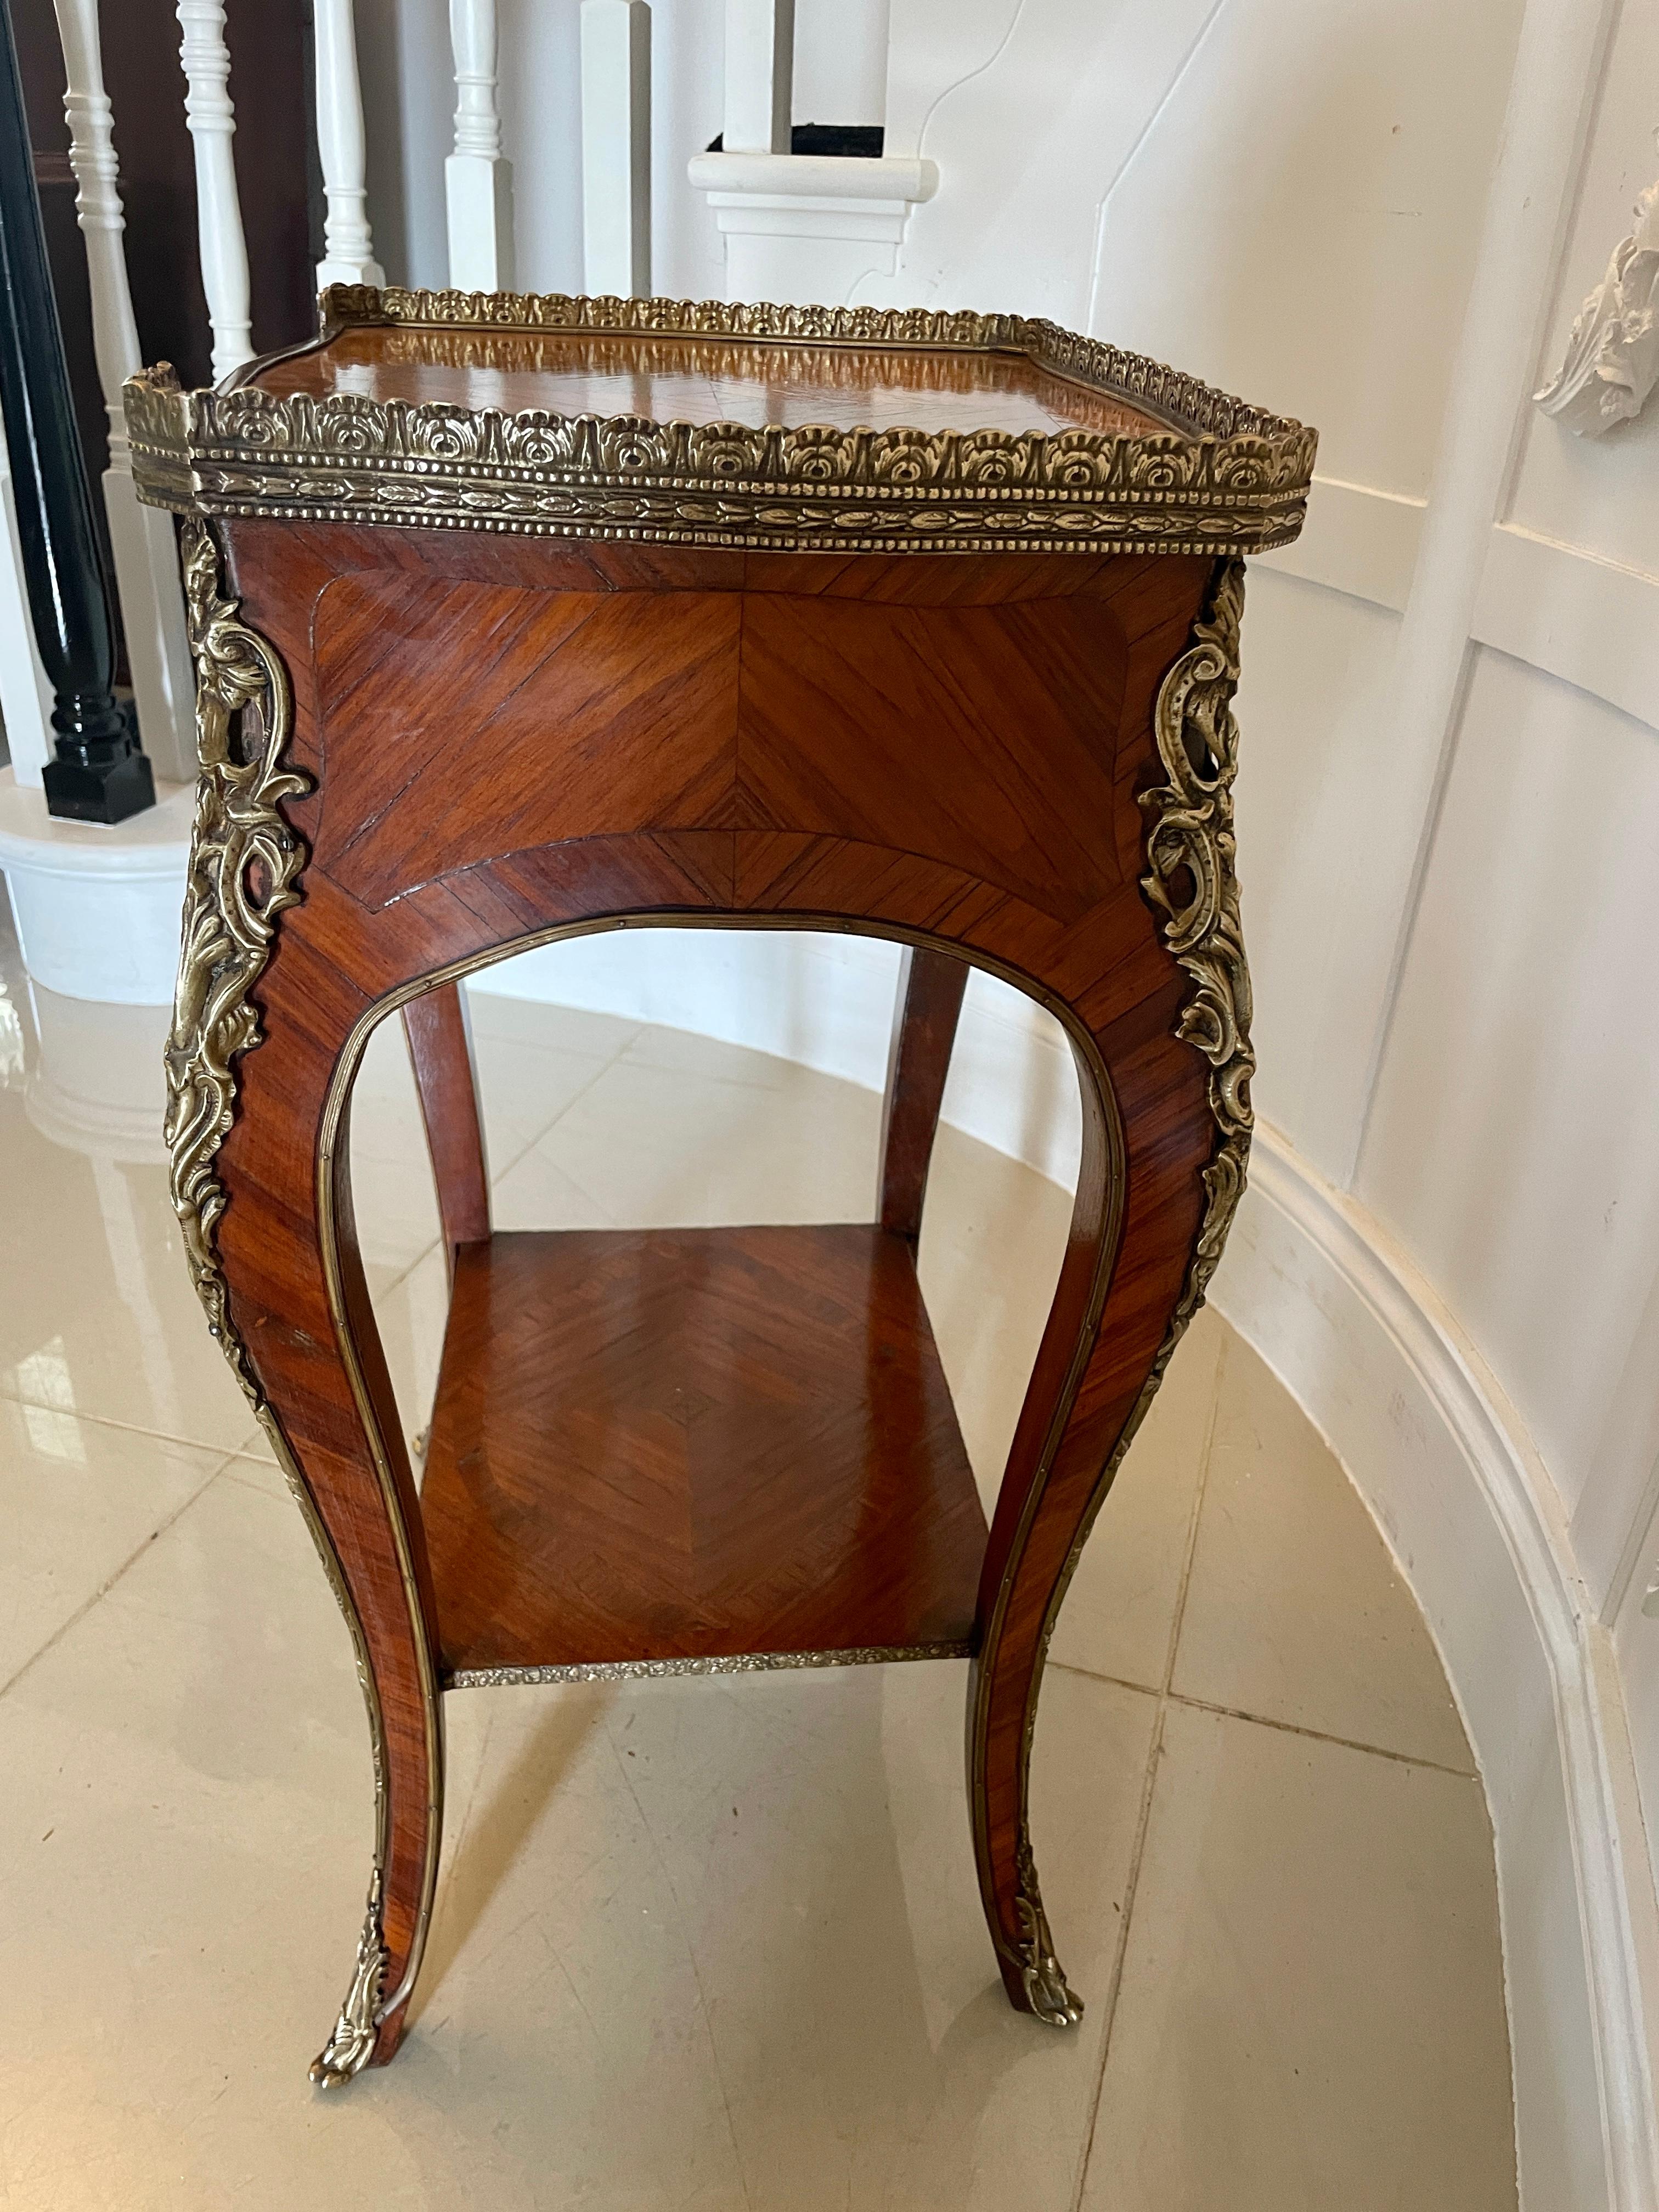 Fine Quality Antique Freestanding French Kingwood and Ormolu Mounted Lamp Table For Sale 7